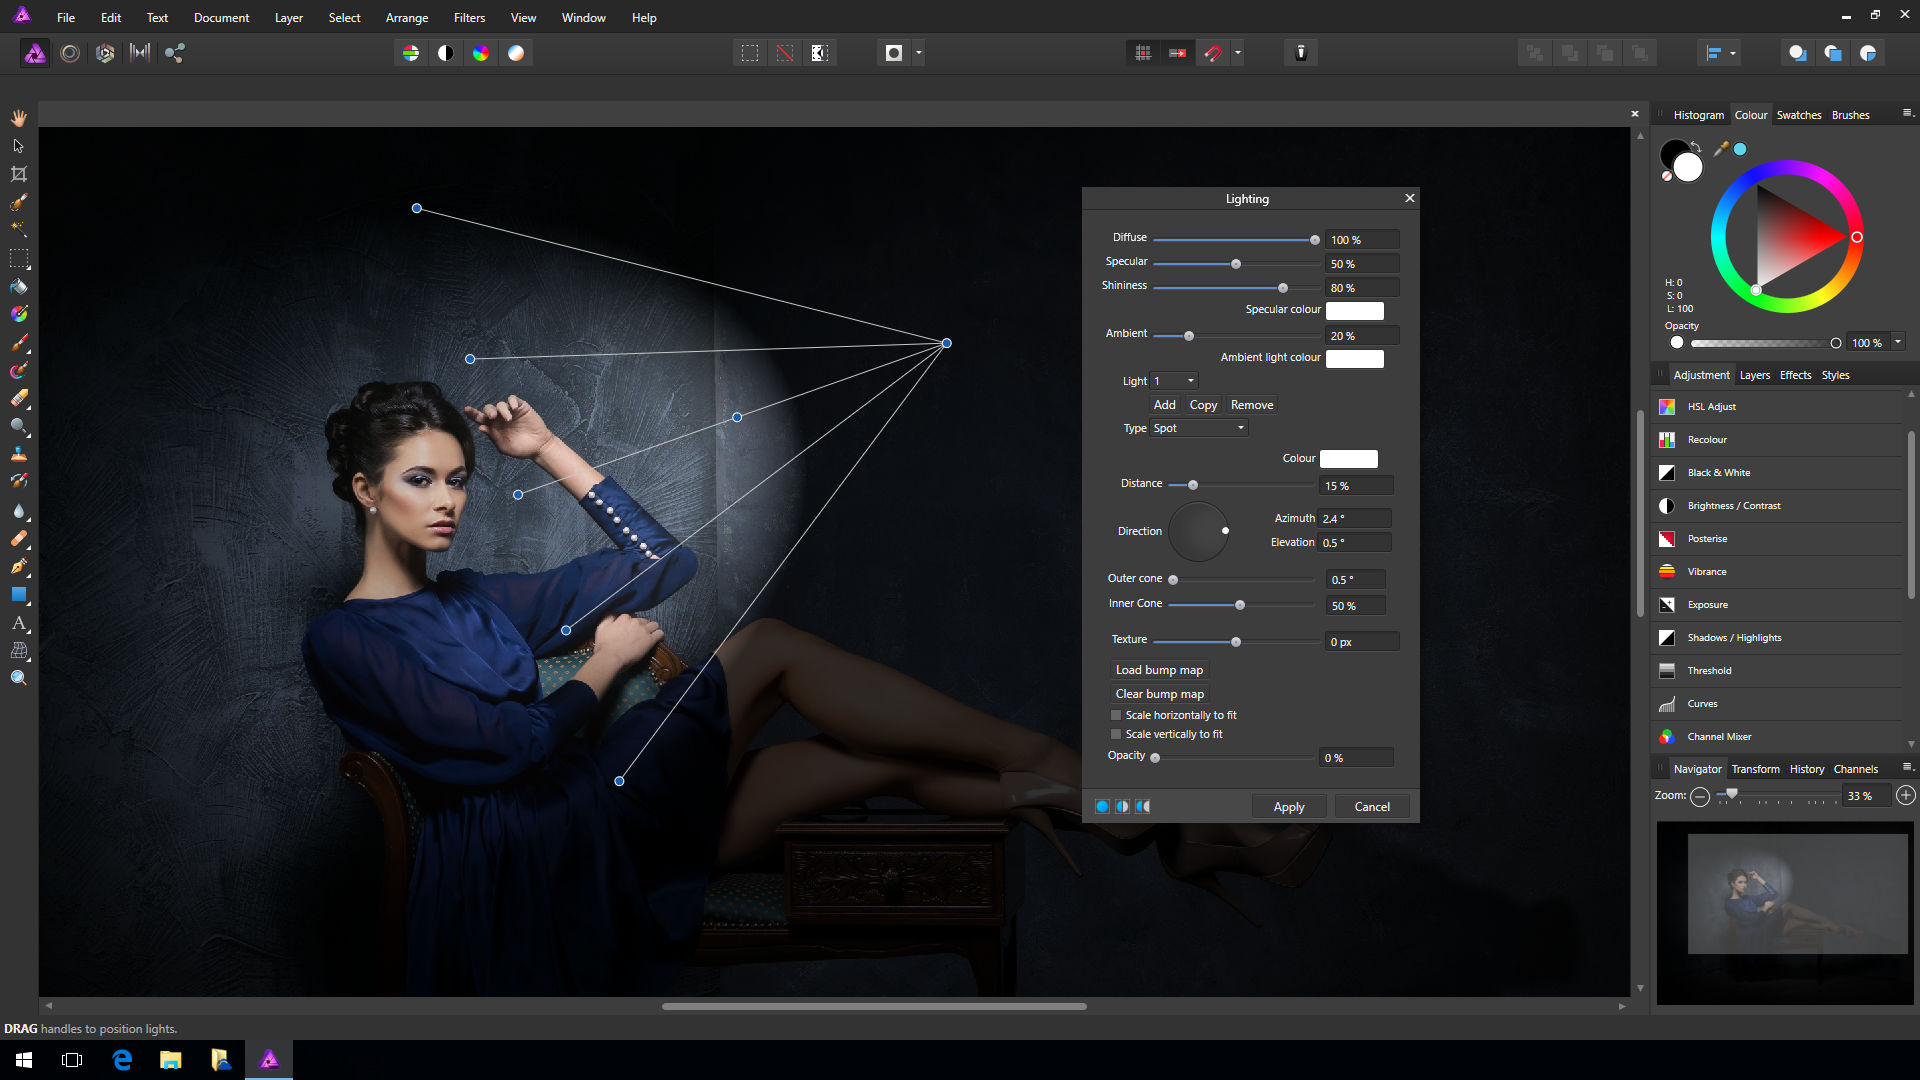 Affinity photo for mac no artistic text tool